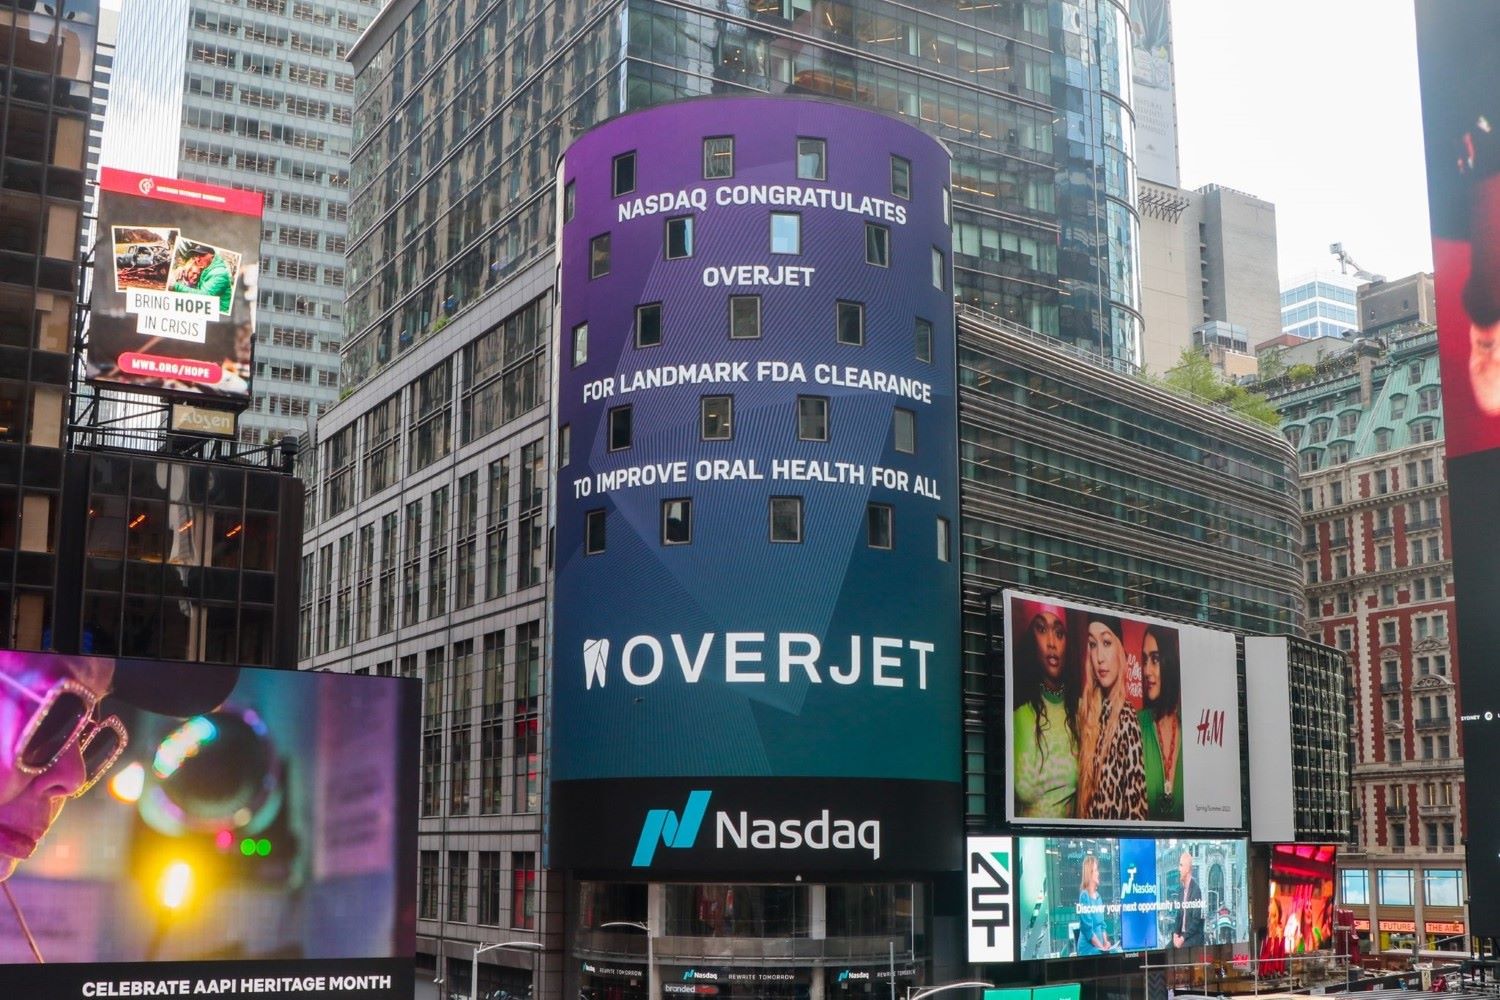 Overjet product is approved by FDA